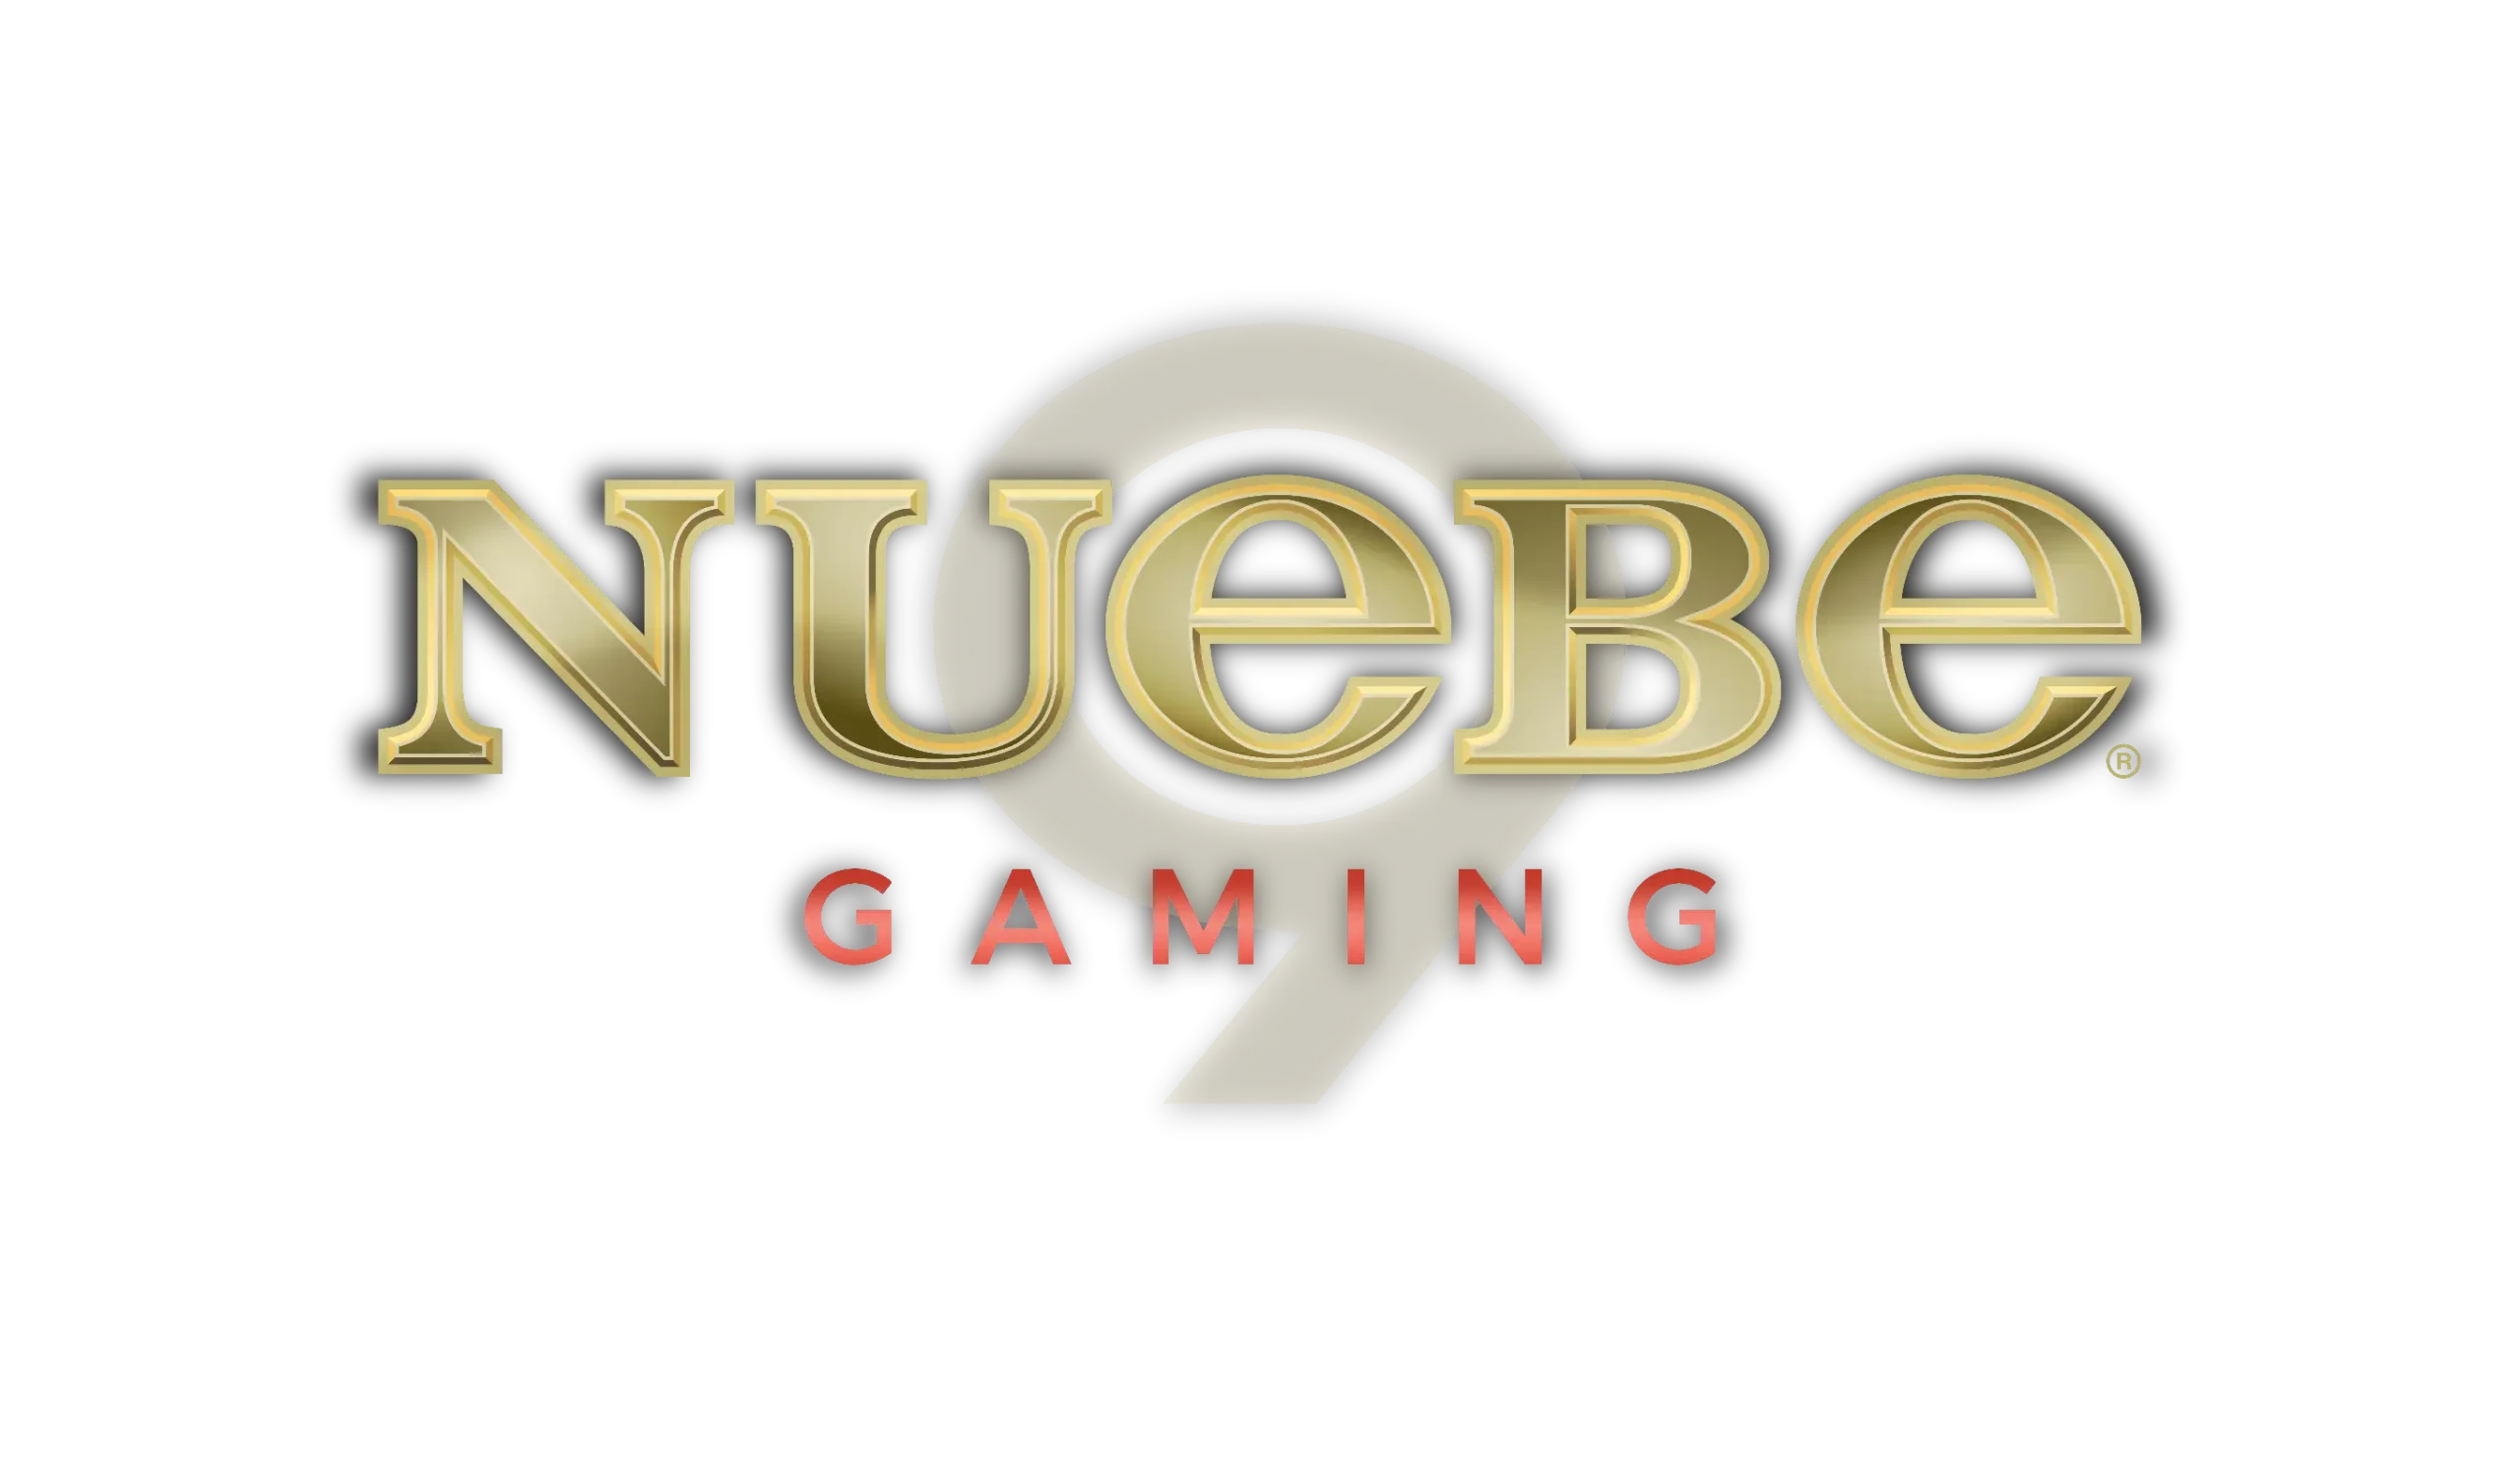 Nuebe Gaming's official logo featuring stylized golden lettering on a black background, exuding elegance and premium quality.